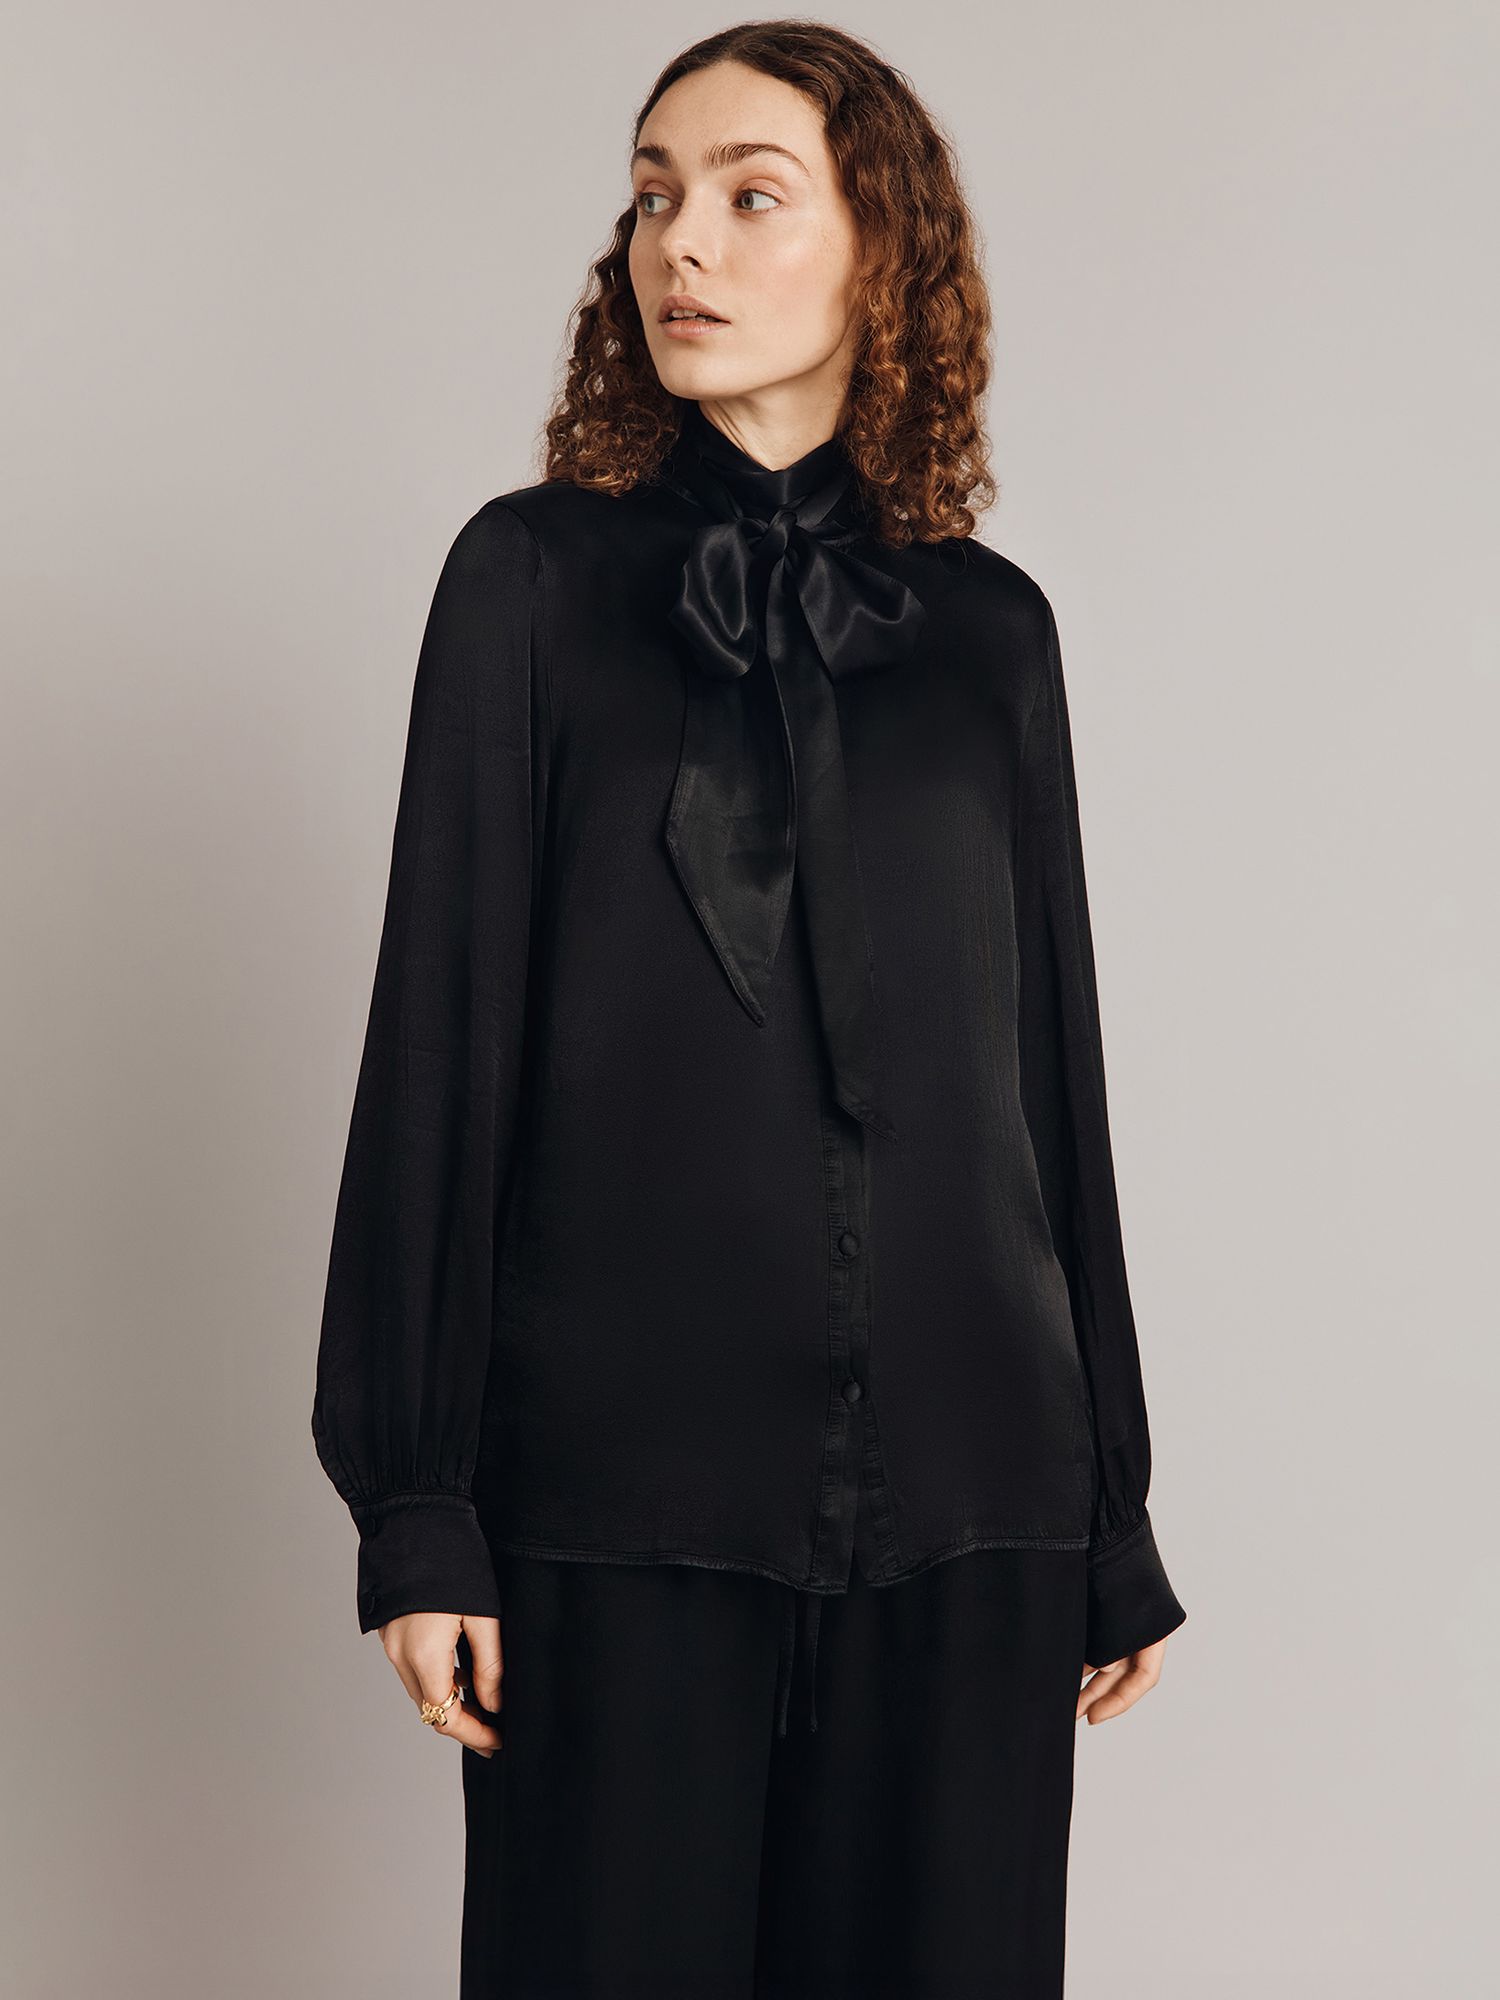 Ghost Anna Pussybow Blouse, Black at John Lewis & Partners